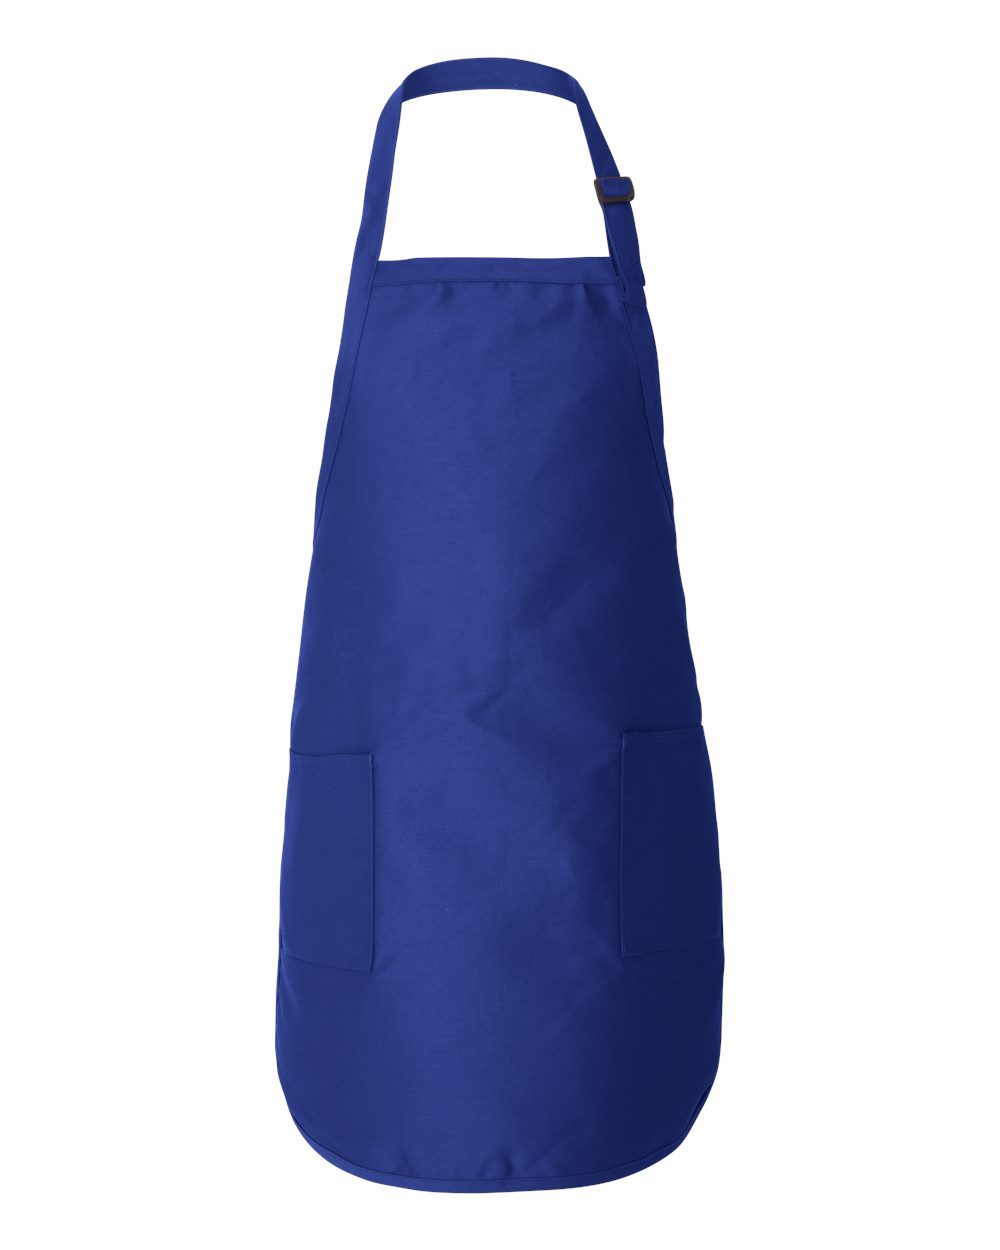 Q-Tees Q4350 - Full-Length Apron with Pockets